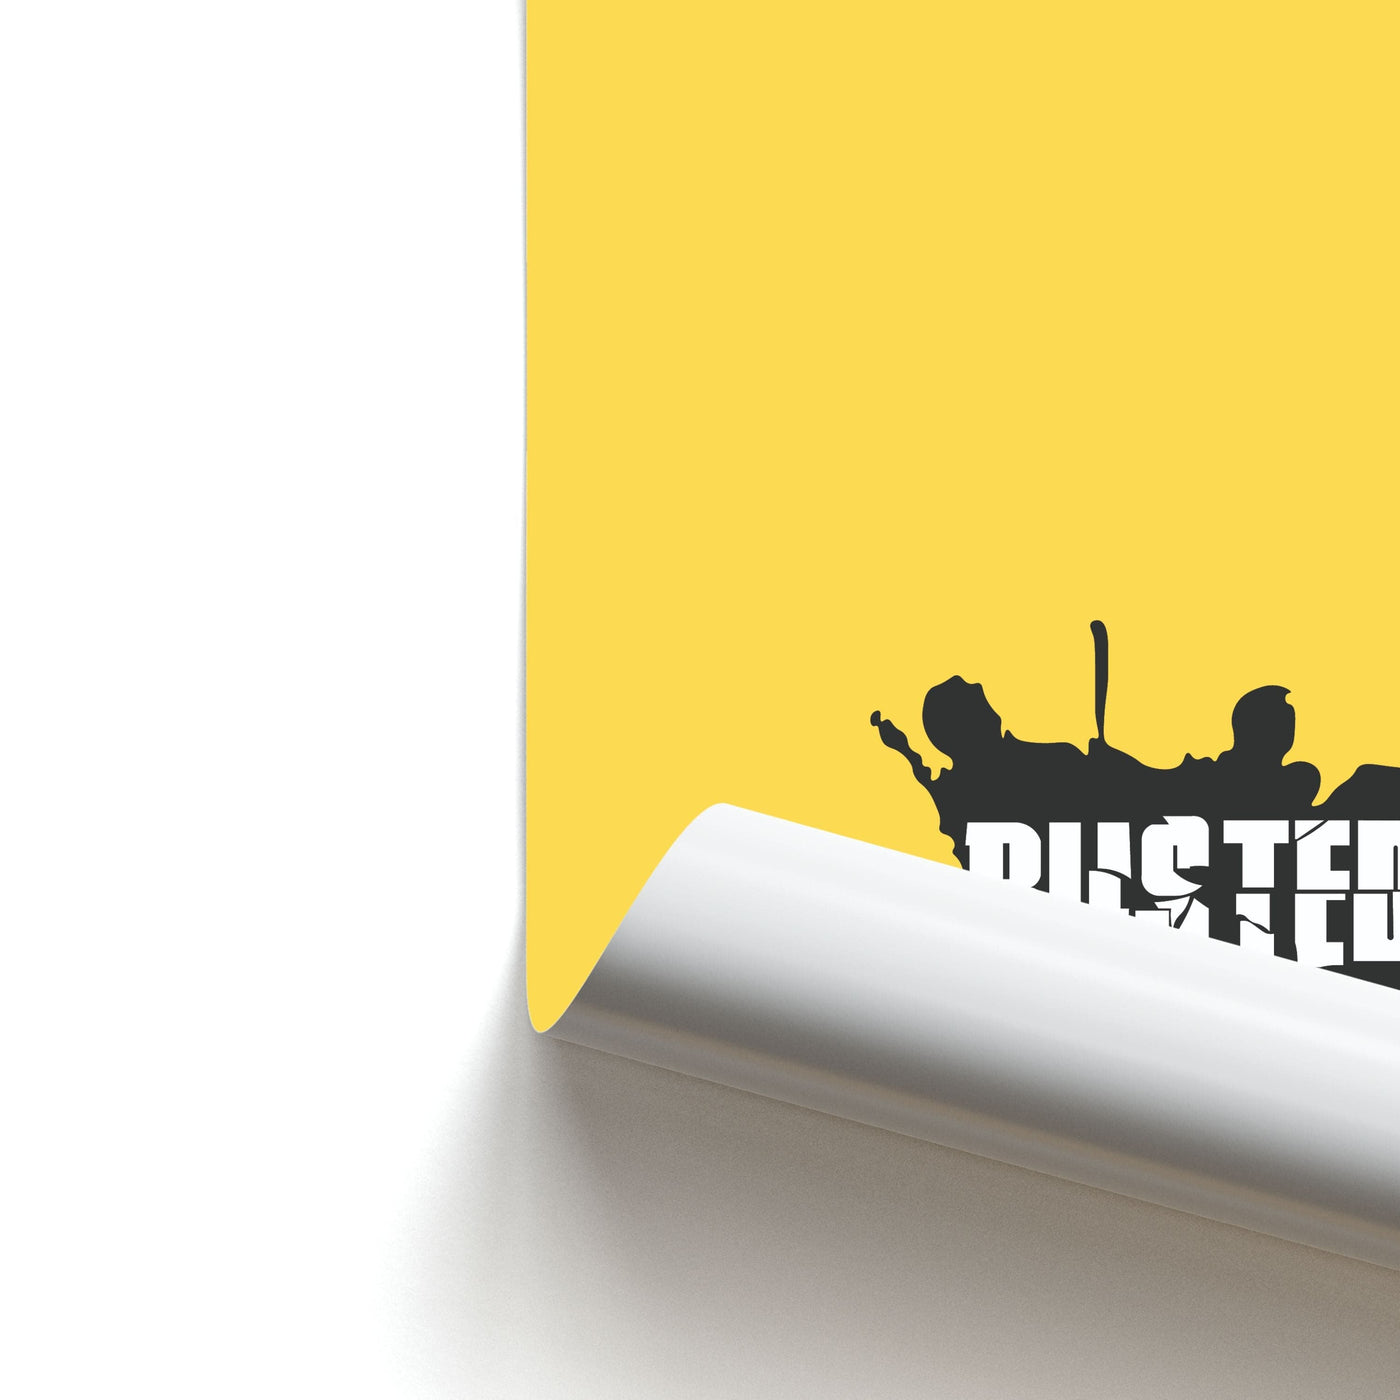 Splatter Text - Busted Poster